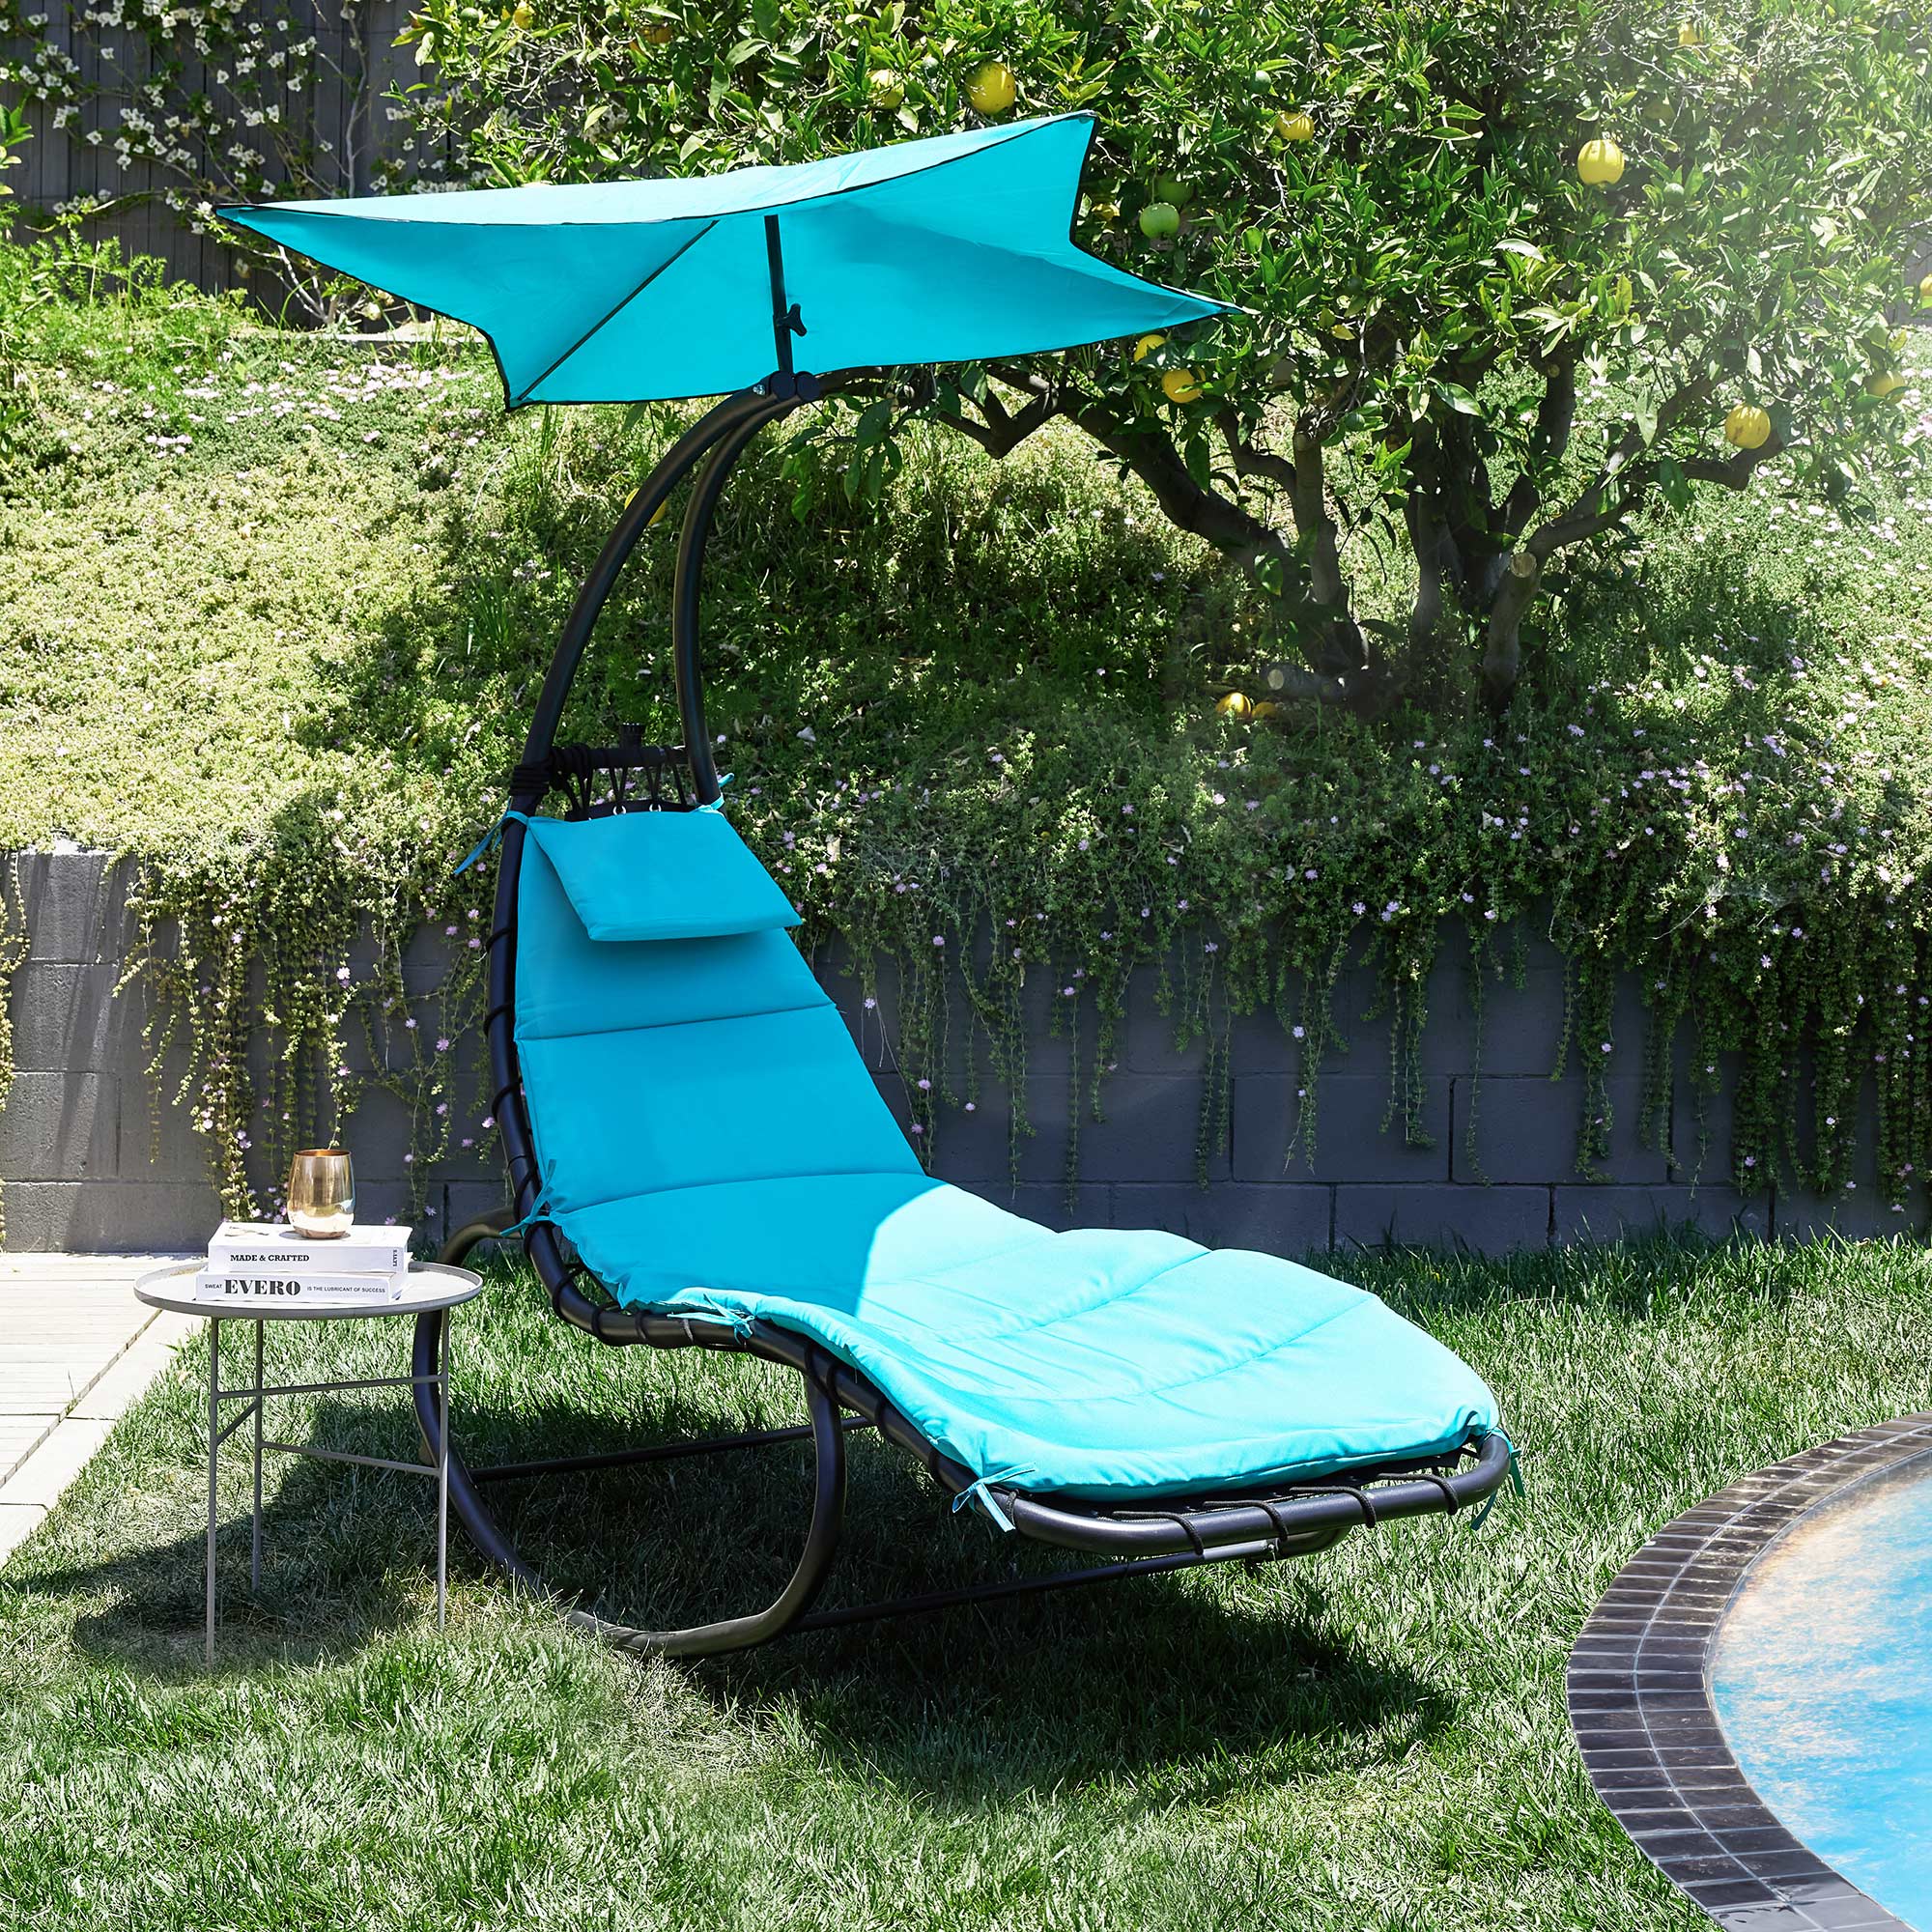 BELLEZE Outdoor Hanging Chaise Lounge Chair Swing Curved Cushion Seat Hammock With Canopy Sun Shade, Blue - image 1 of 4